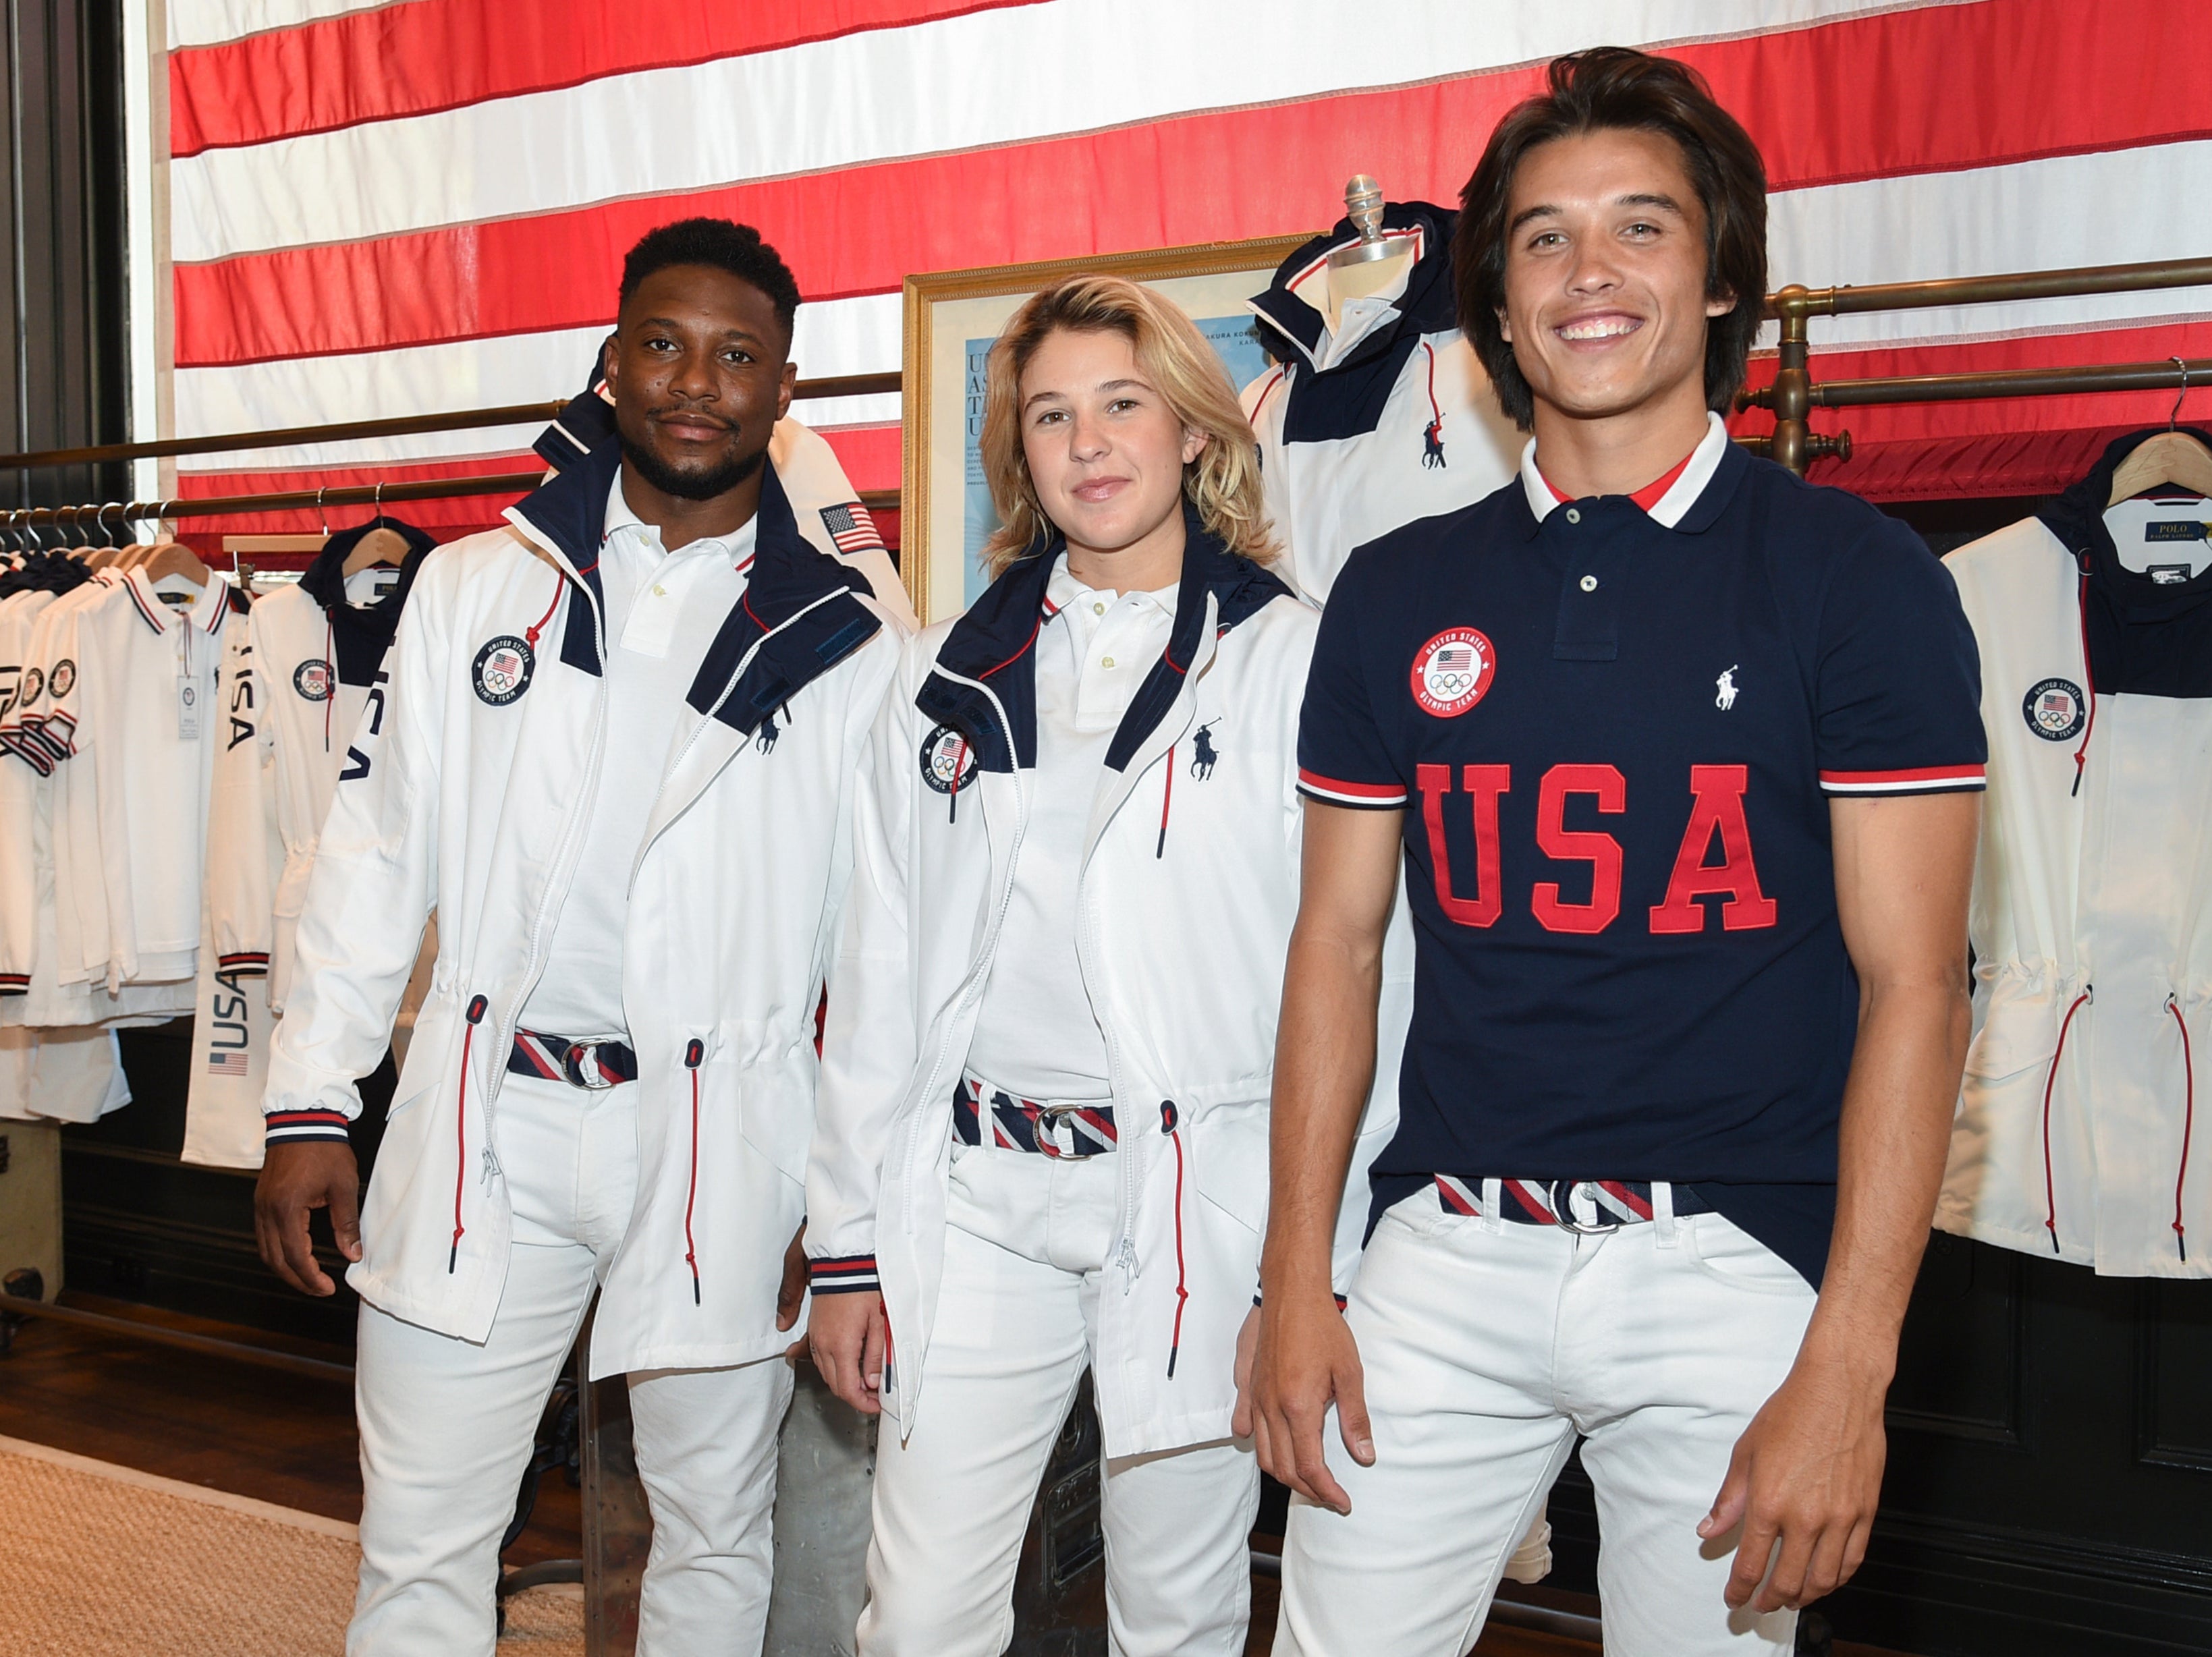 Team USA’s outfits for the 2020 Olympics closing ceremony